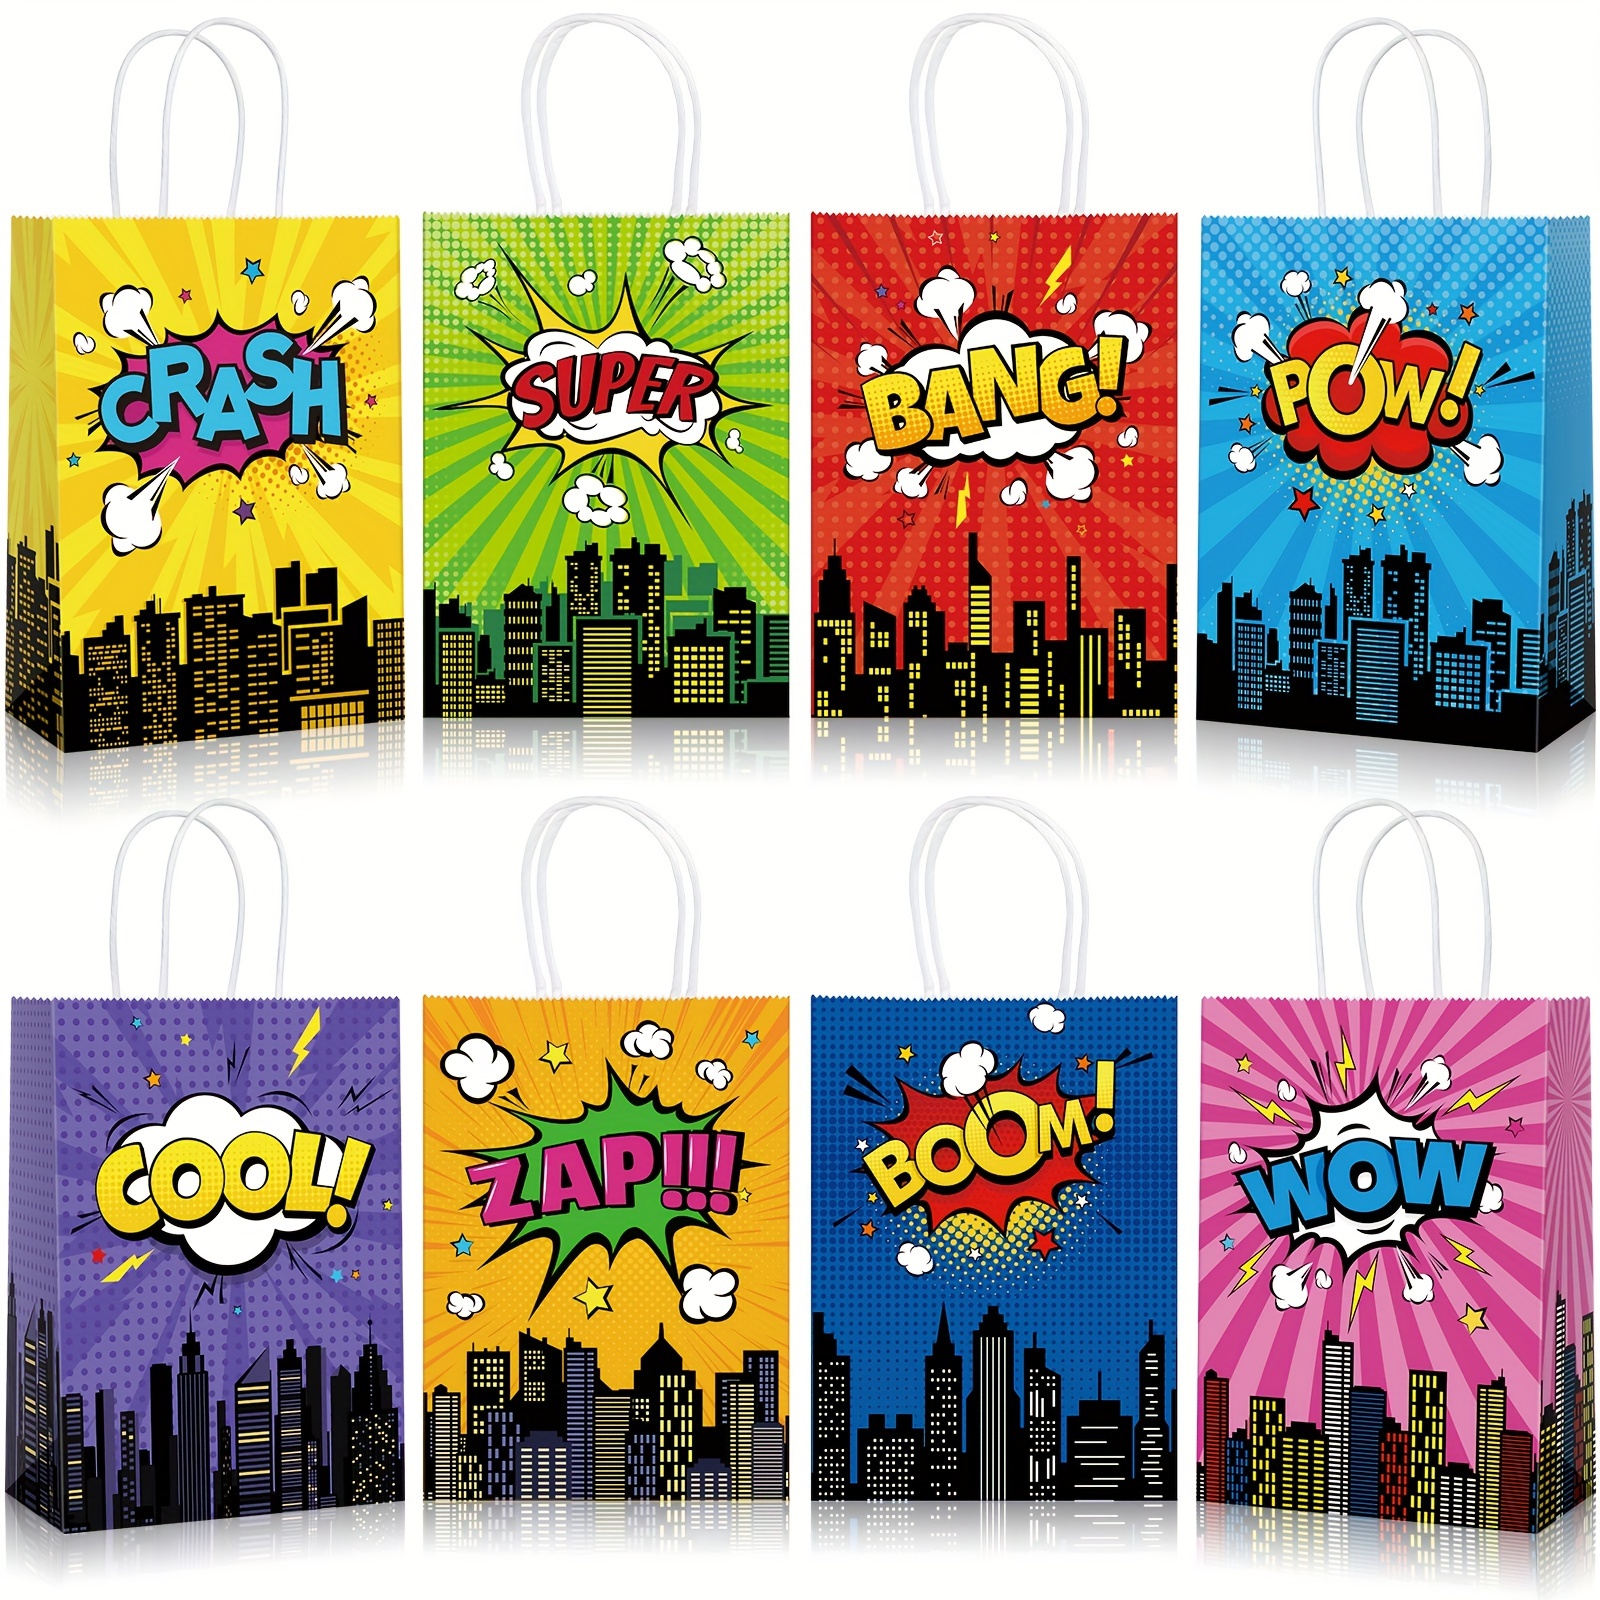 

adventure Awaits" Bulk Set Of 24 Superhero Party Favor Bags - Assorted Comic Hero Designs For Birthday & Baby Shower Gifts